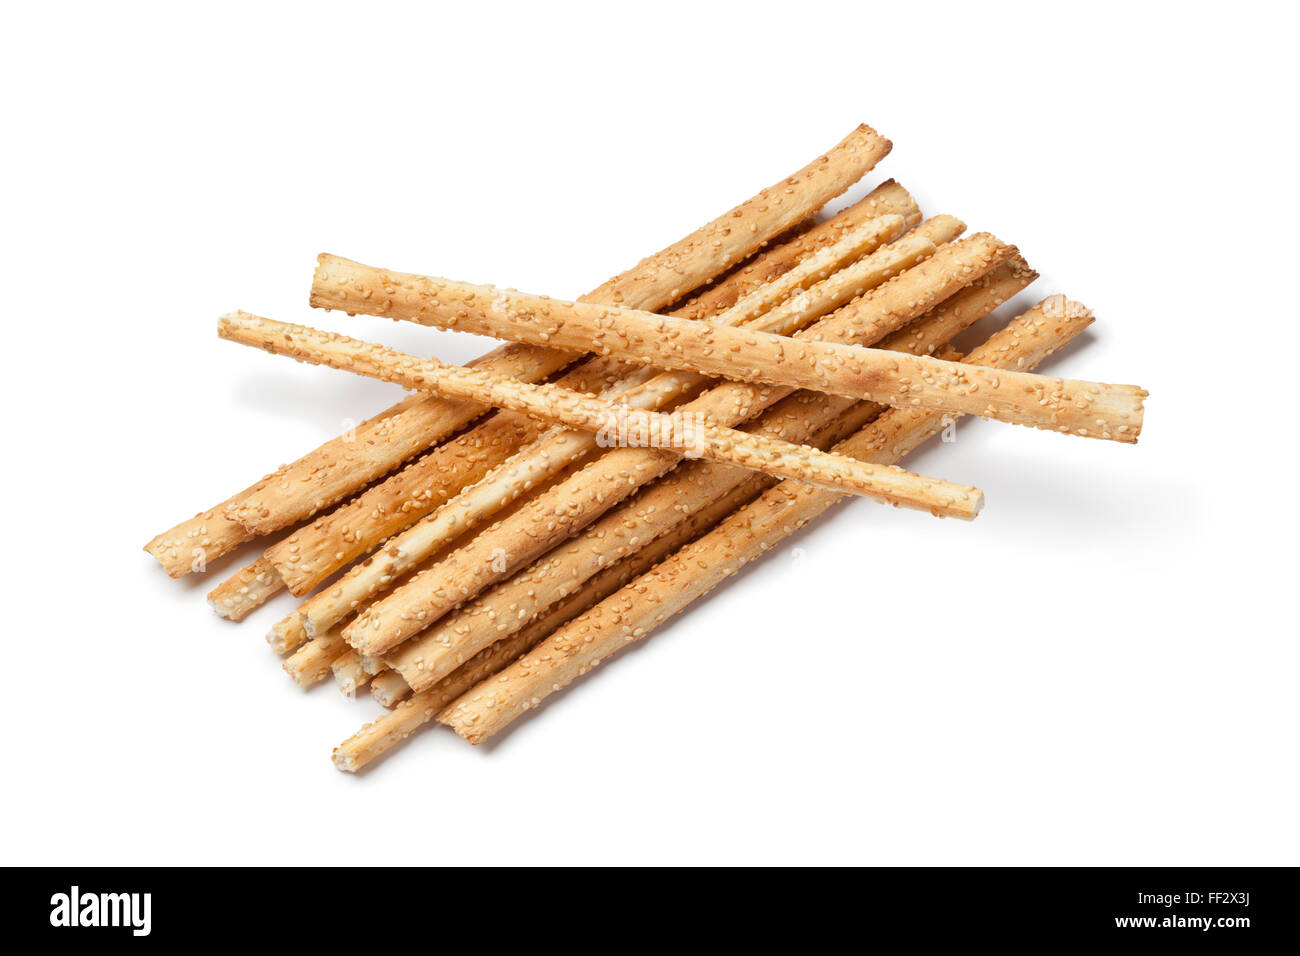 Breadsticks with sesame seeds on white background Stock Photo